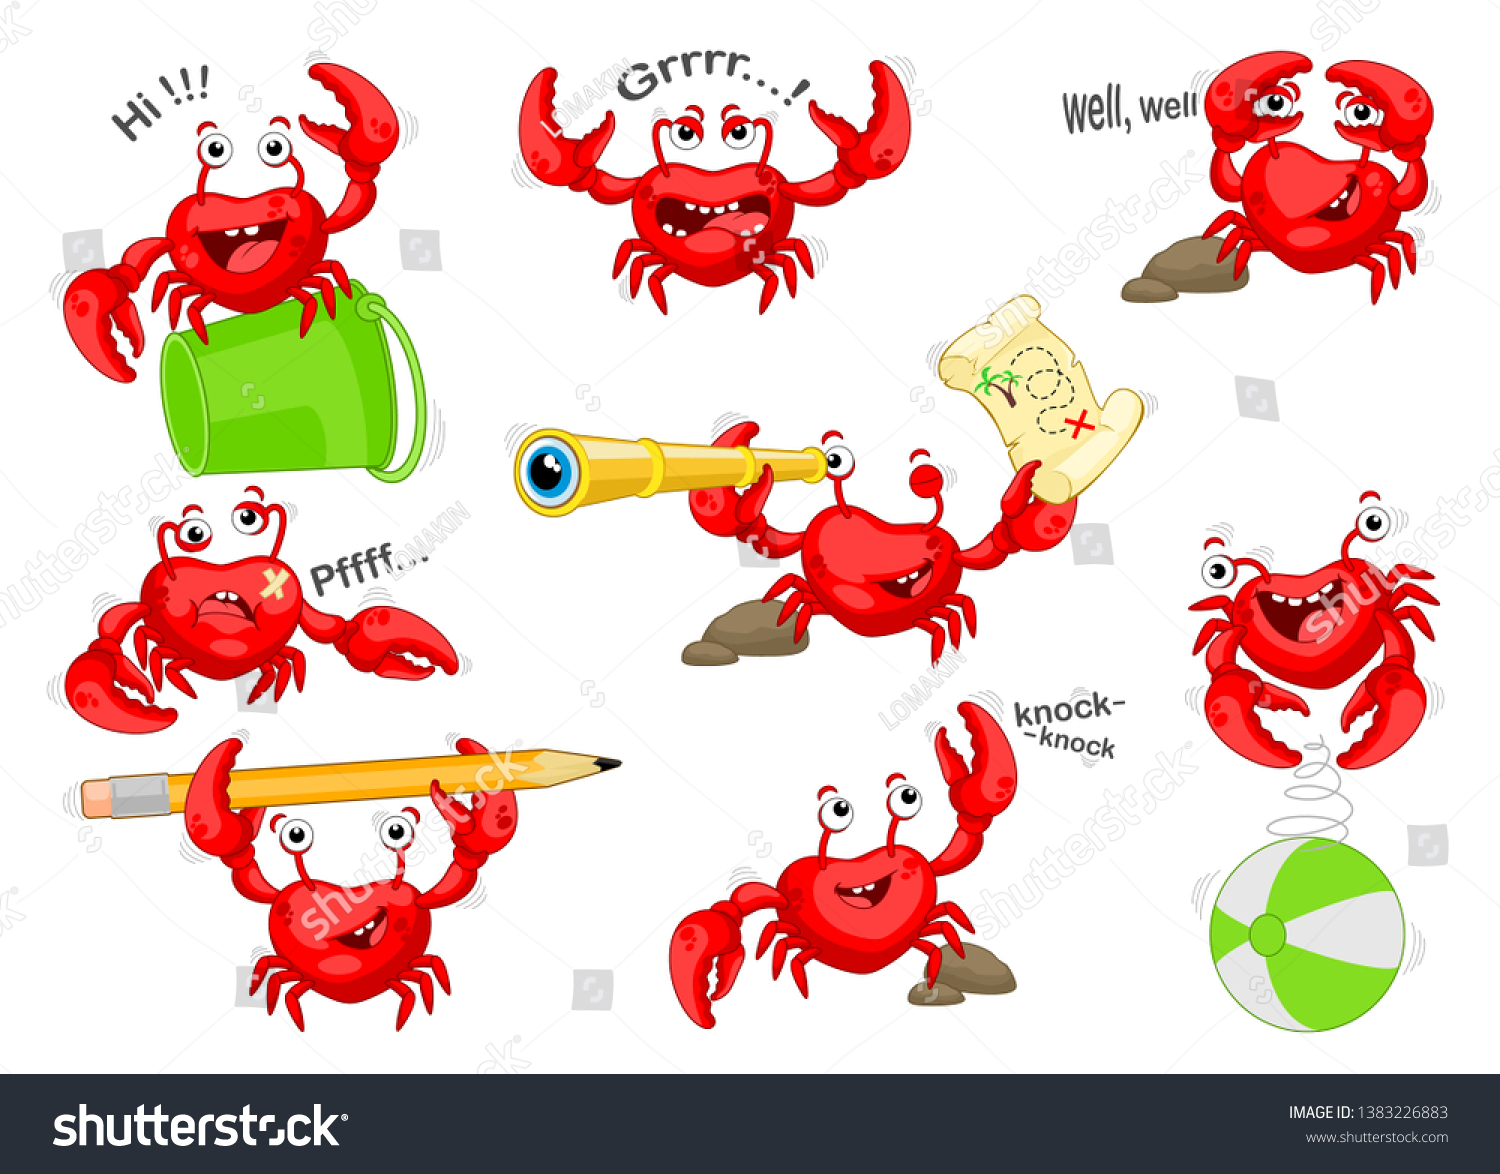 SVG of   Set of red crabs in different poses and emotions. Illustration of crabs on white background. svg